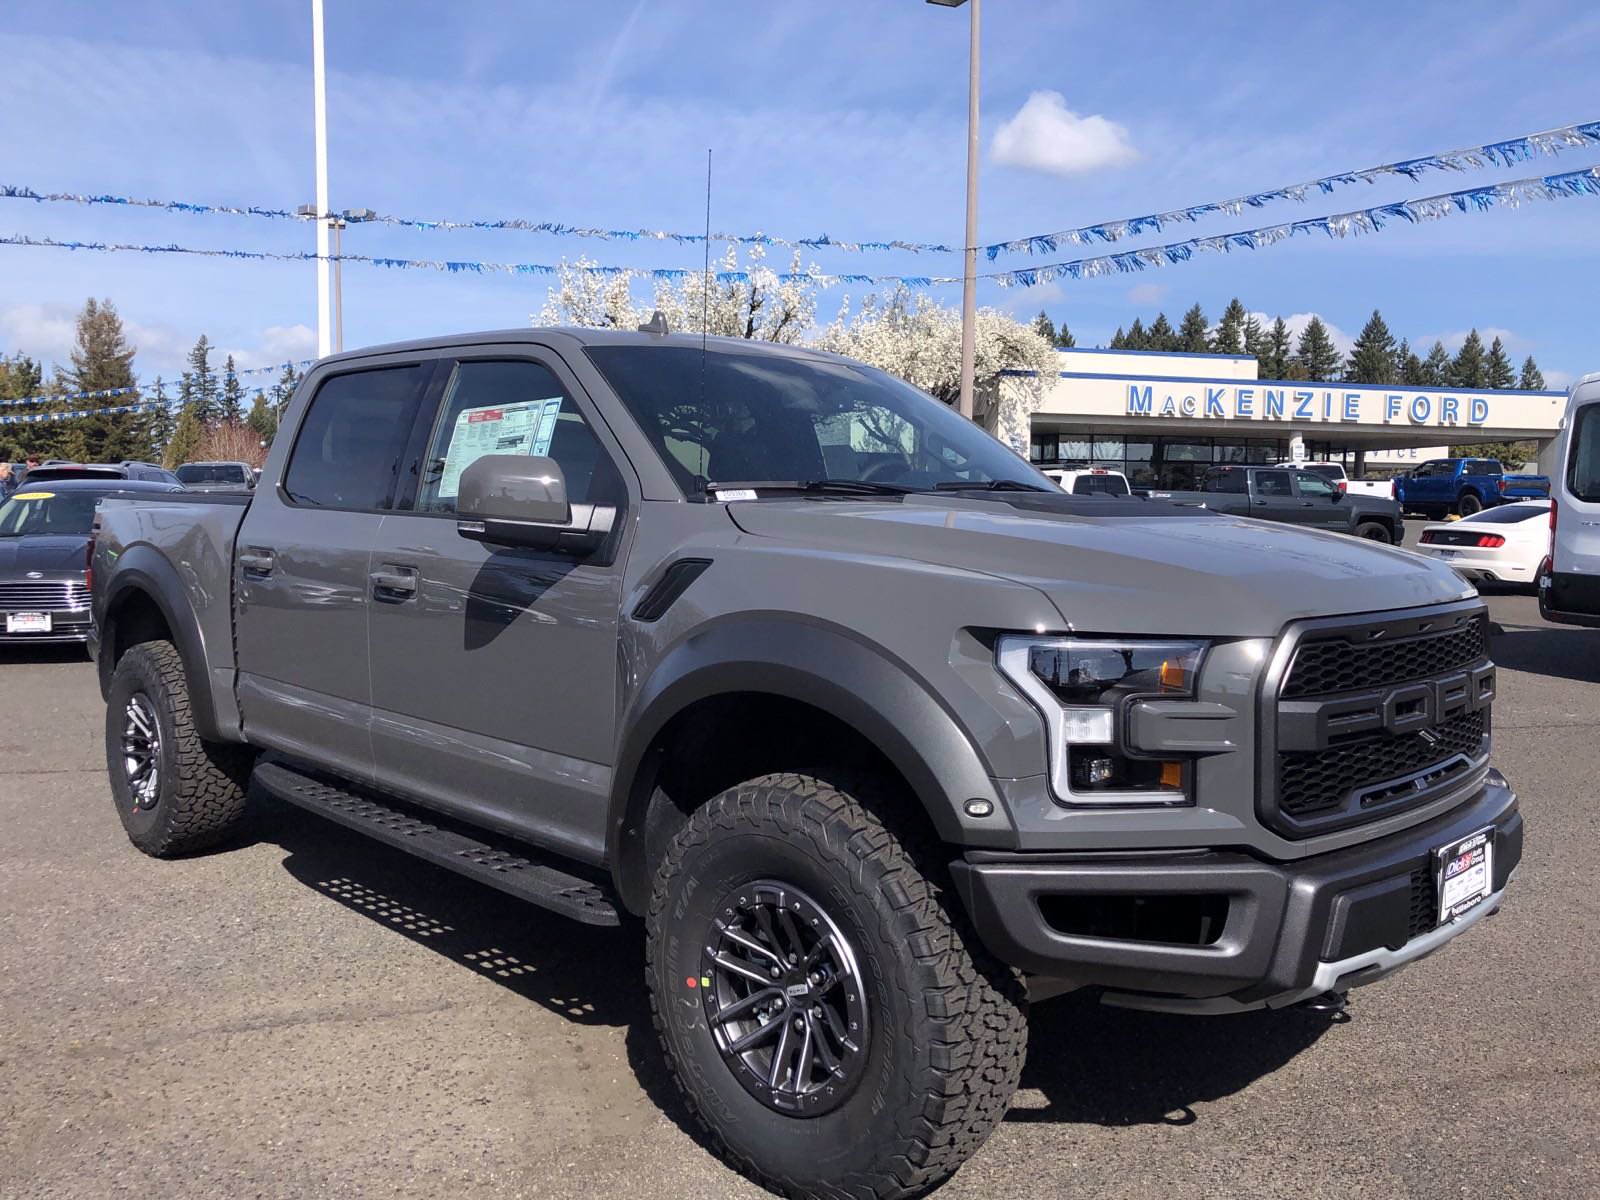 New 2020 Ford F 150 Raptor 4wd Supercrew 55 Crew Cab Pickup In